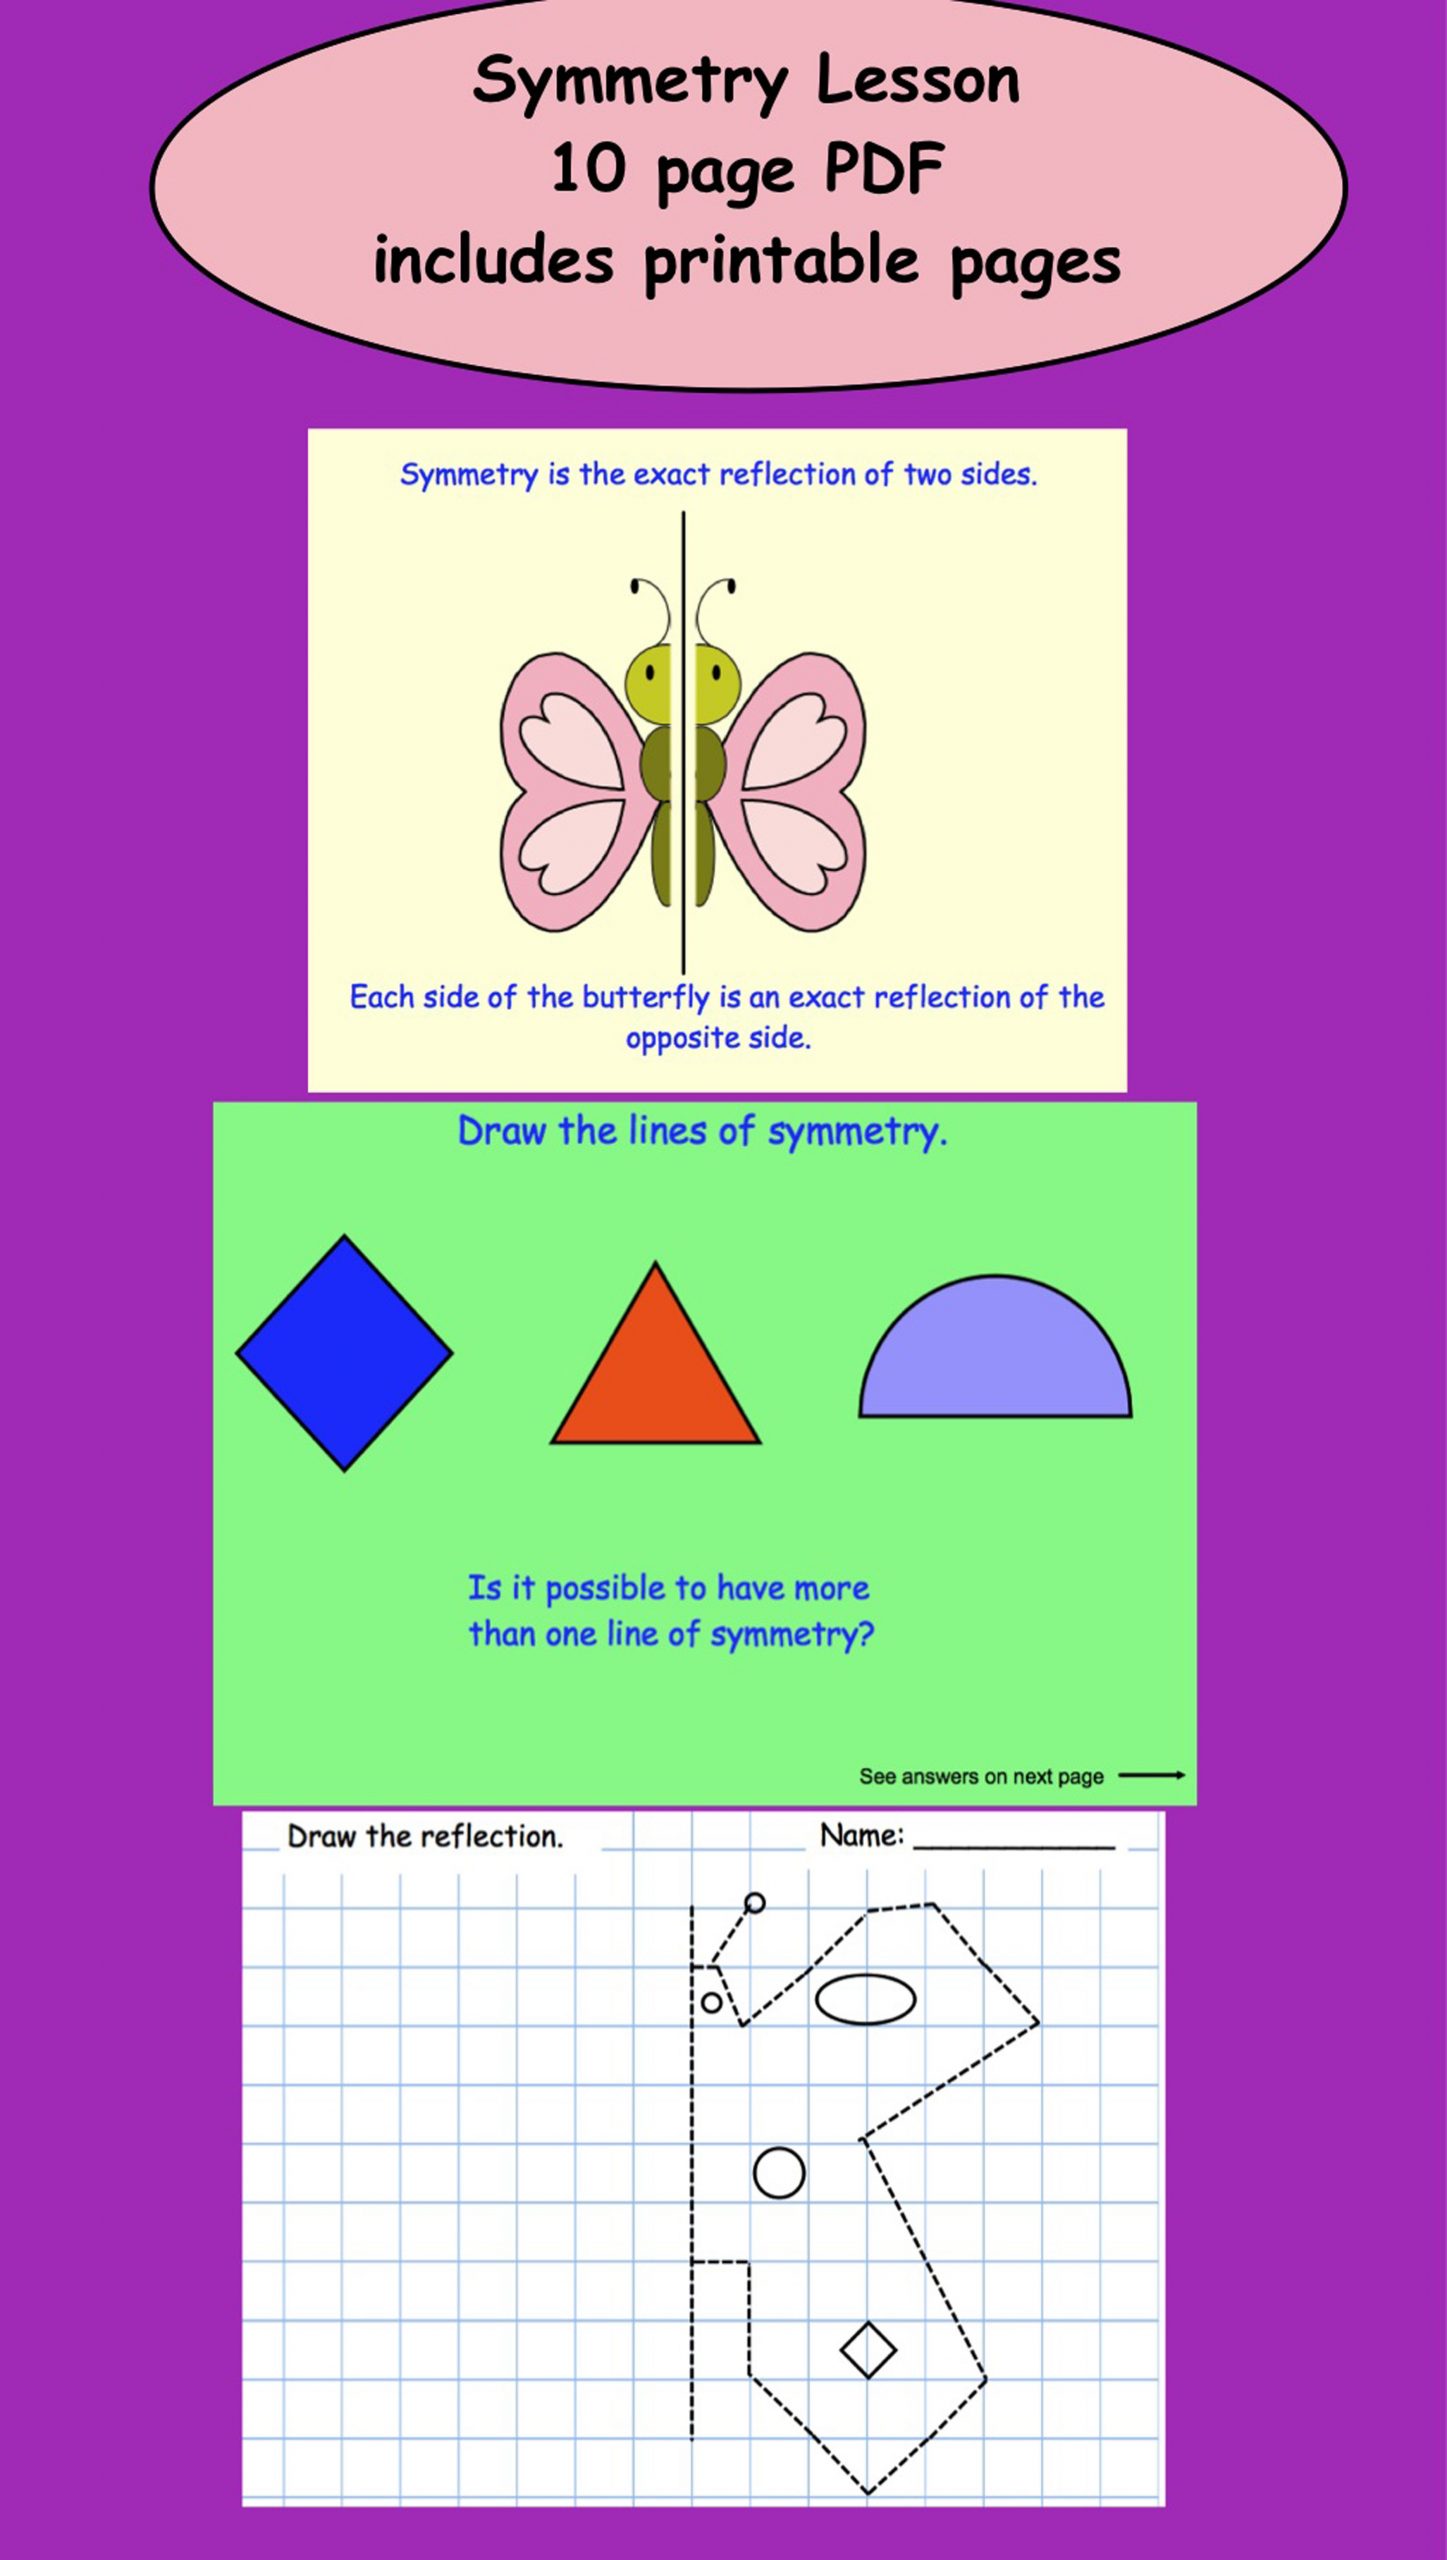 What Is Symmetry? Lesson And Printables For Gr. 3-4 Pdf